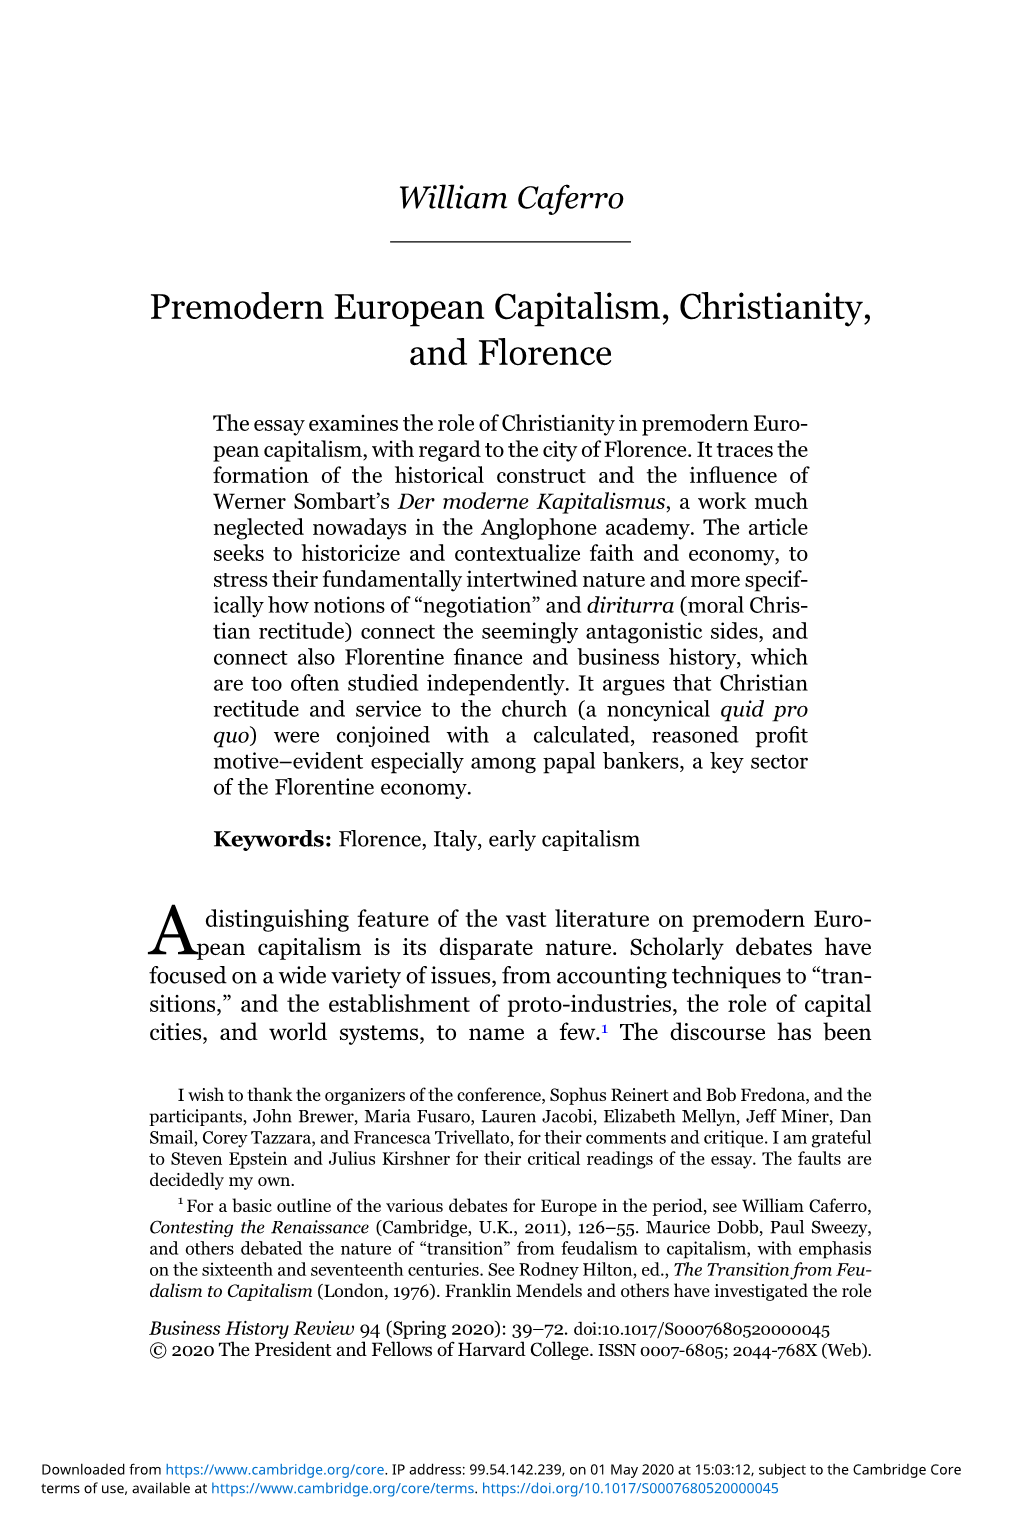 Premodern European Capitalism, Christianity, and Florence